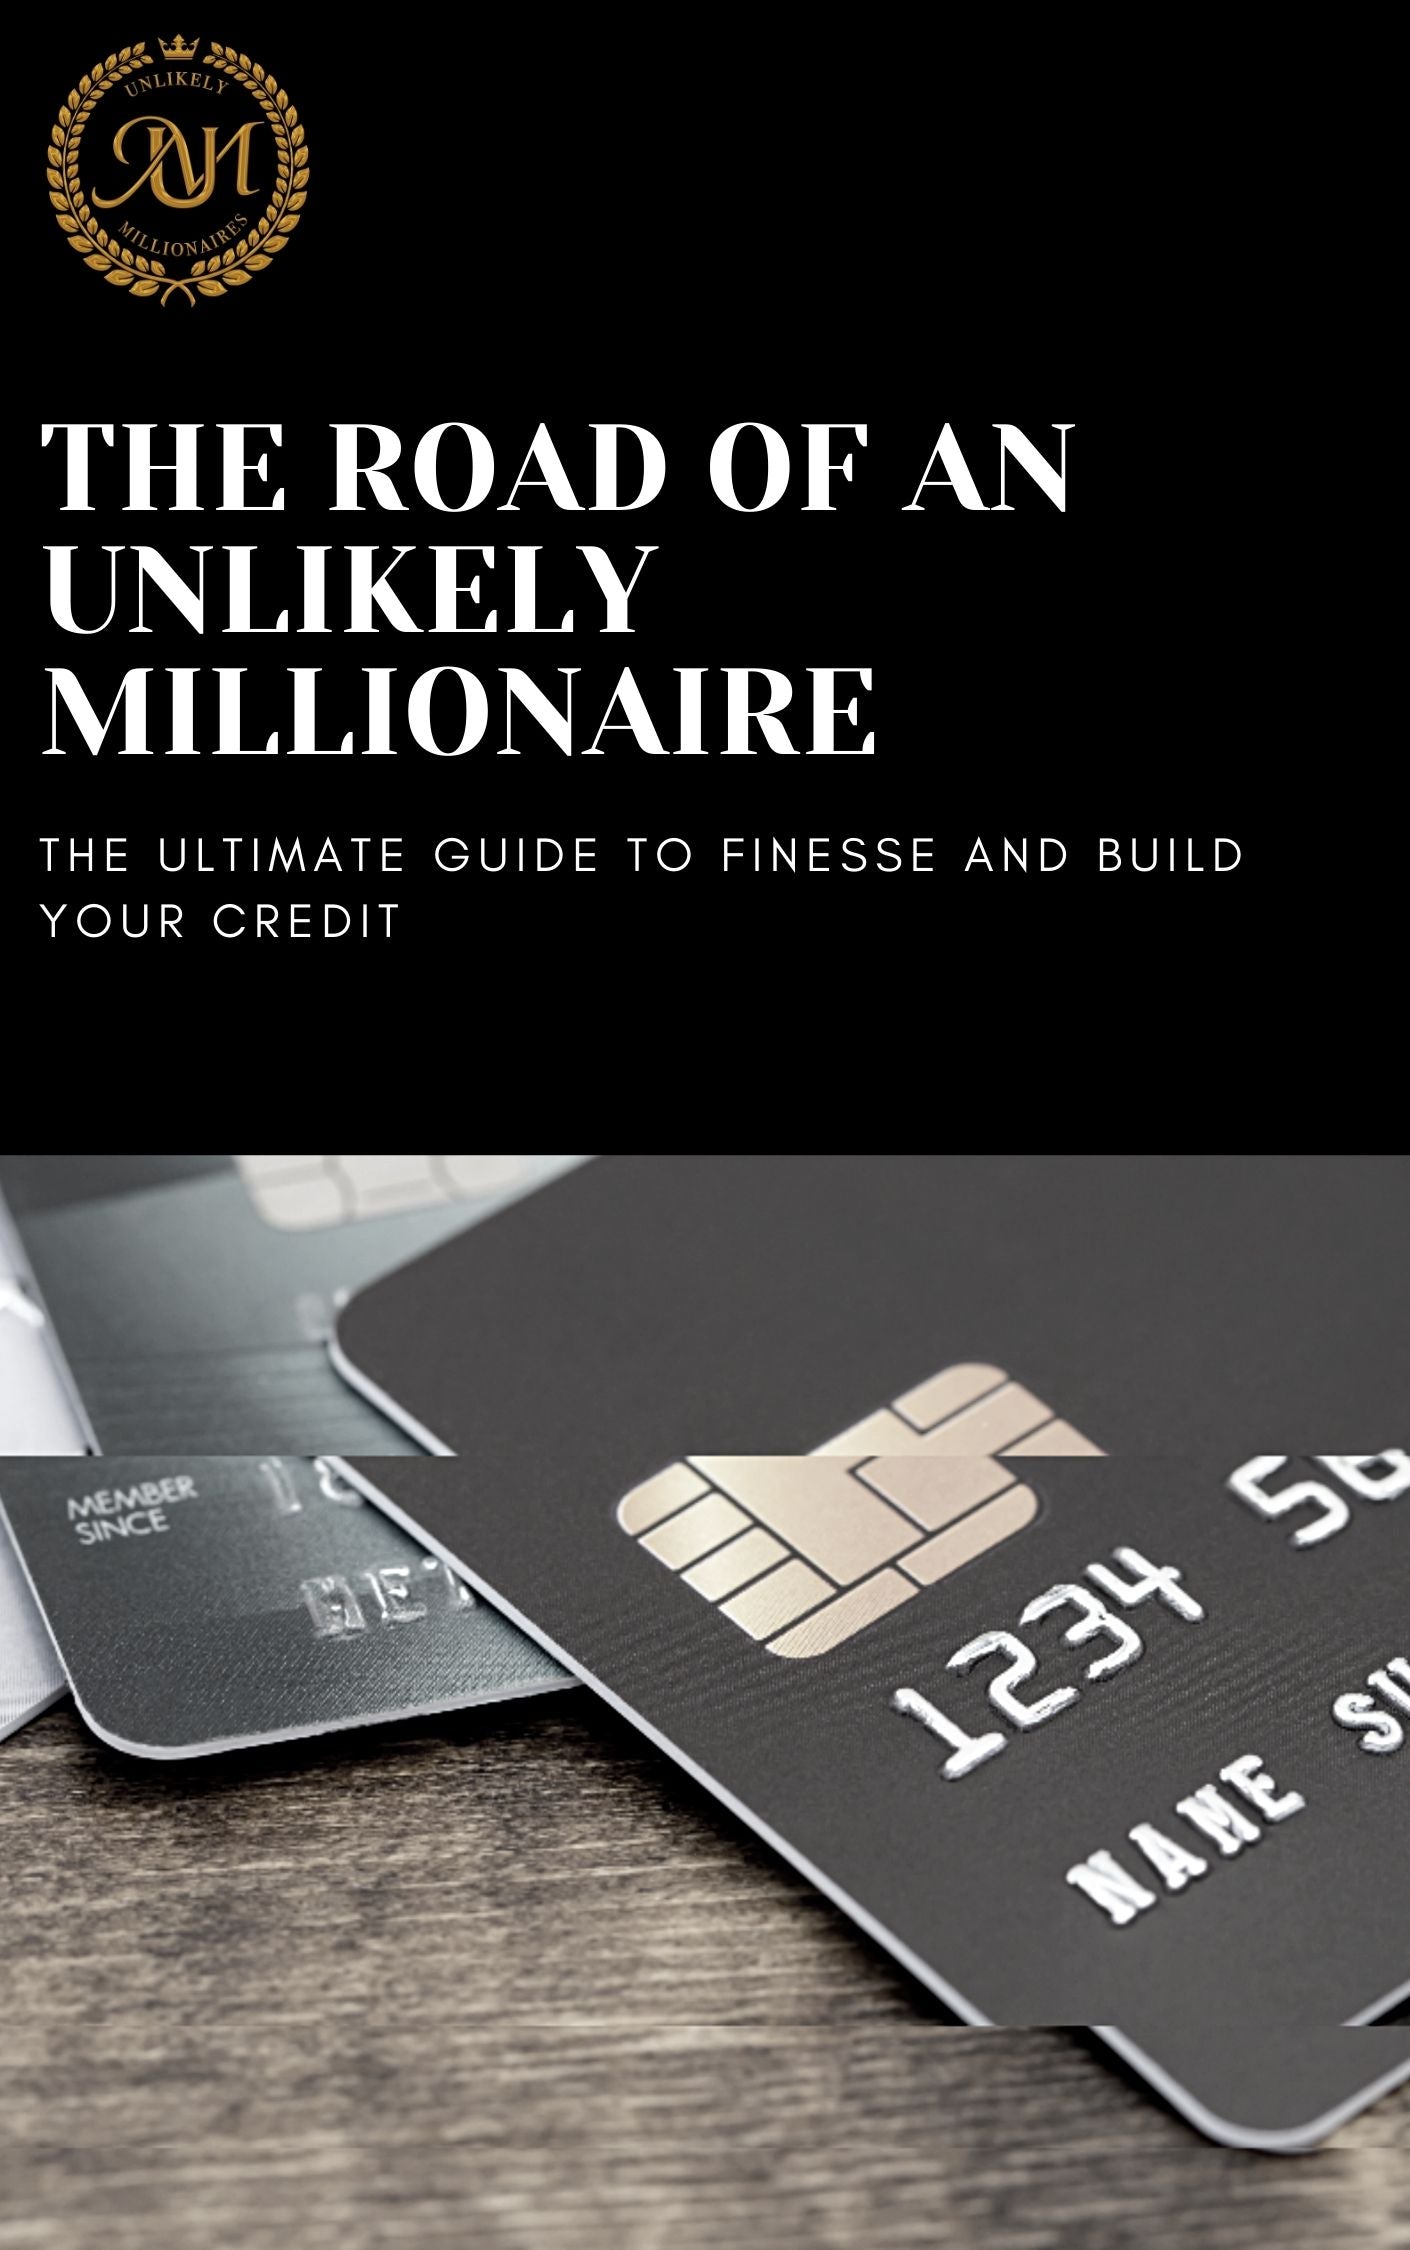 The Road of an Unlikely Millionaire eBook